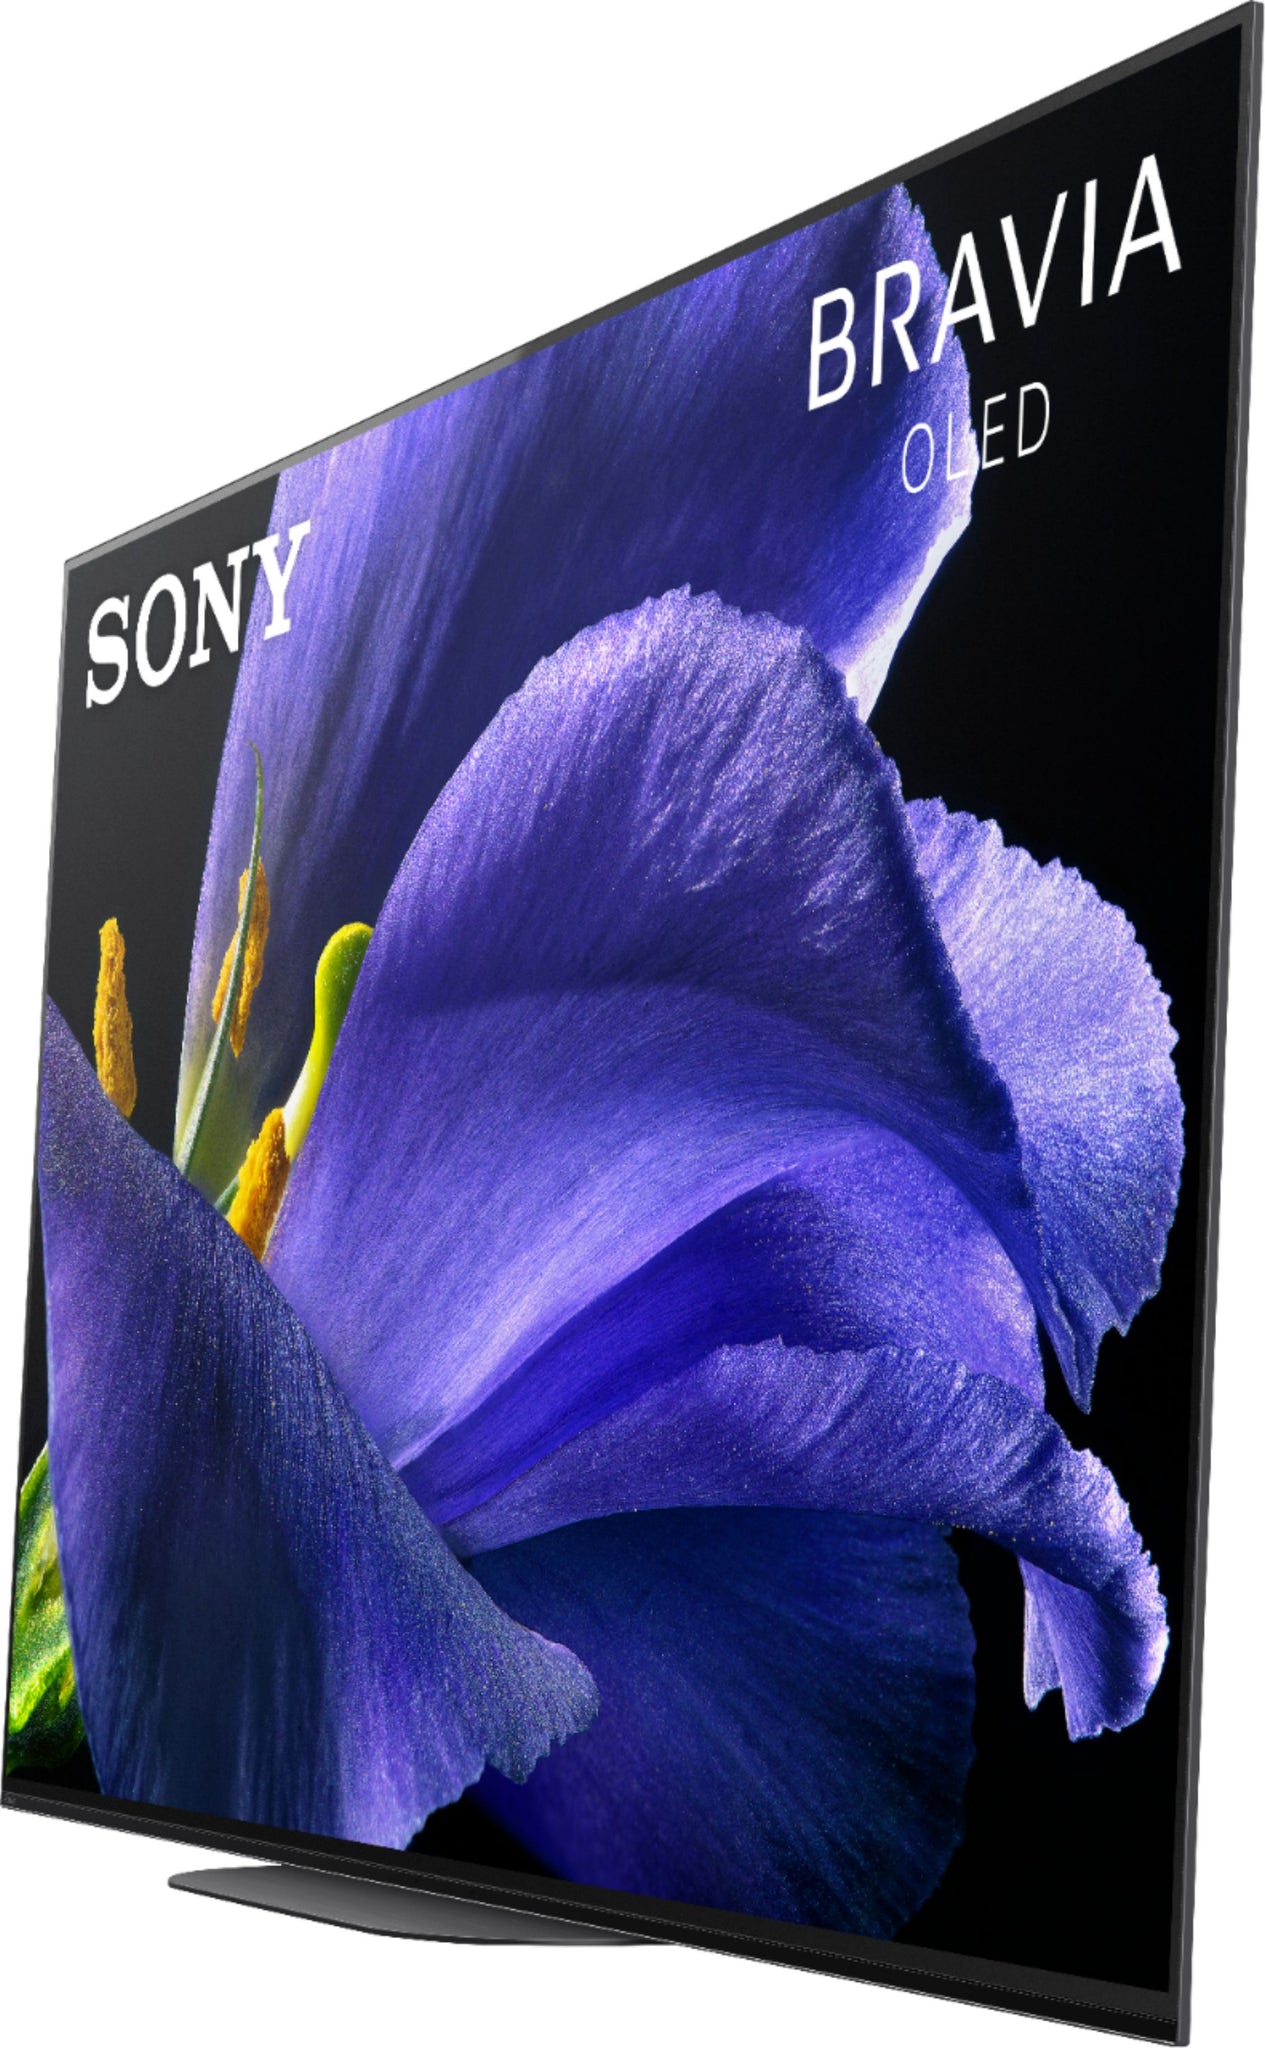 Sony XBR77A9G 77 Inch TV: MASTER Series BRAVIA OLED 4K Ultra HD Smart TV with HDR and Alexa Compatibility